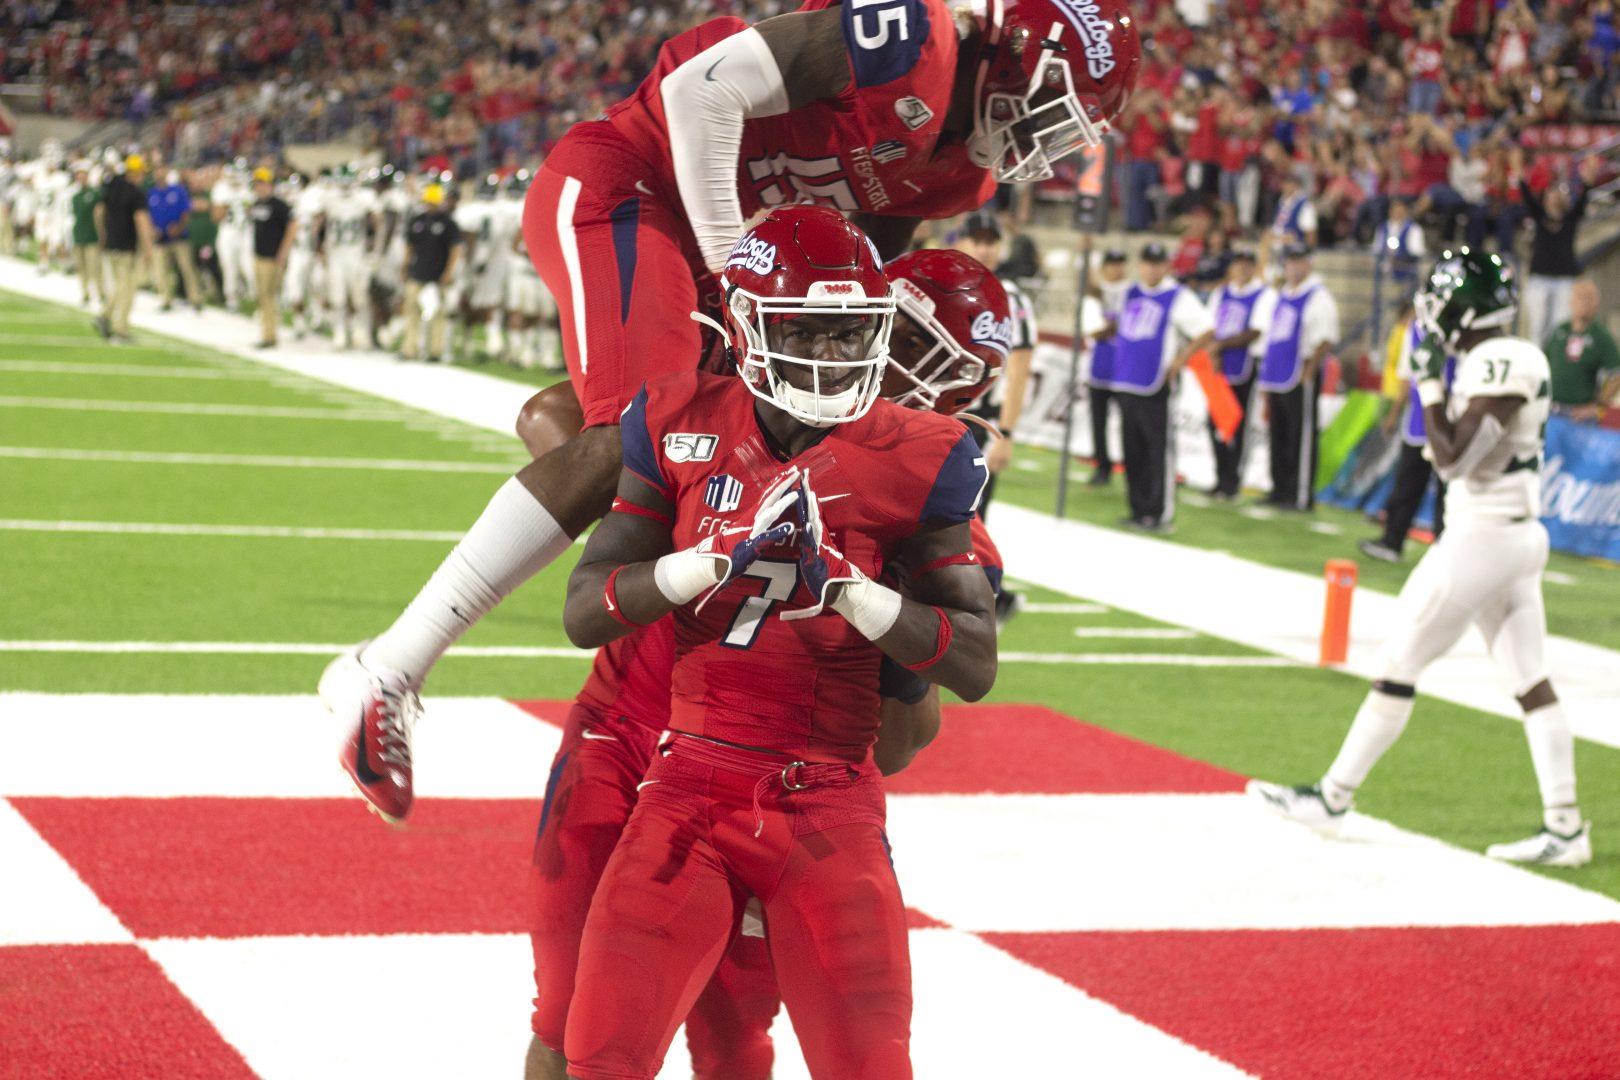 Fresno State wide receiver Derrion Grimm (center) celebrates with teammates after scoring a touchdown during a home game at the Bulldog Stadium on Saturday, Sept. 21, 2019. (Jorge Rodriguez/ The Collegian)